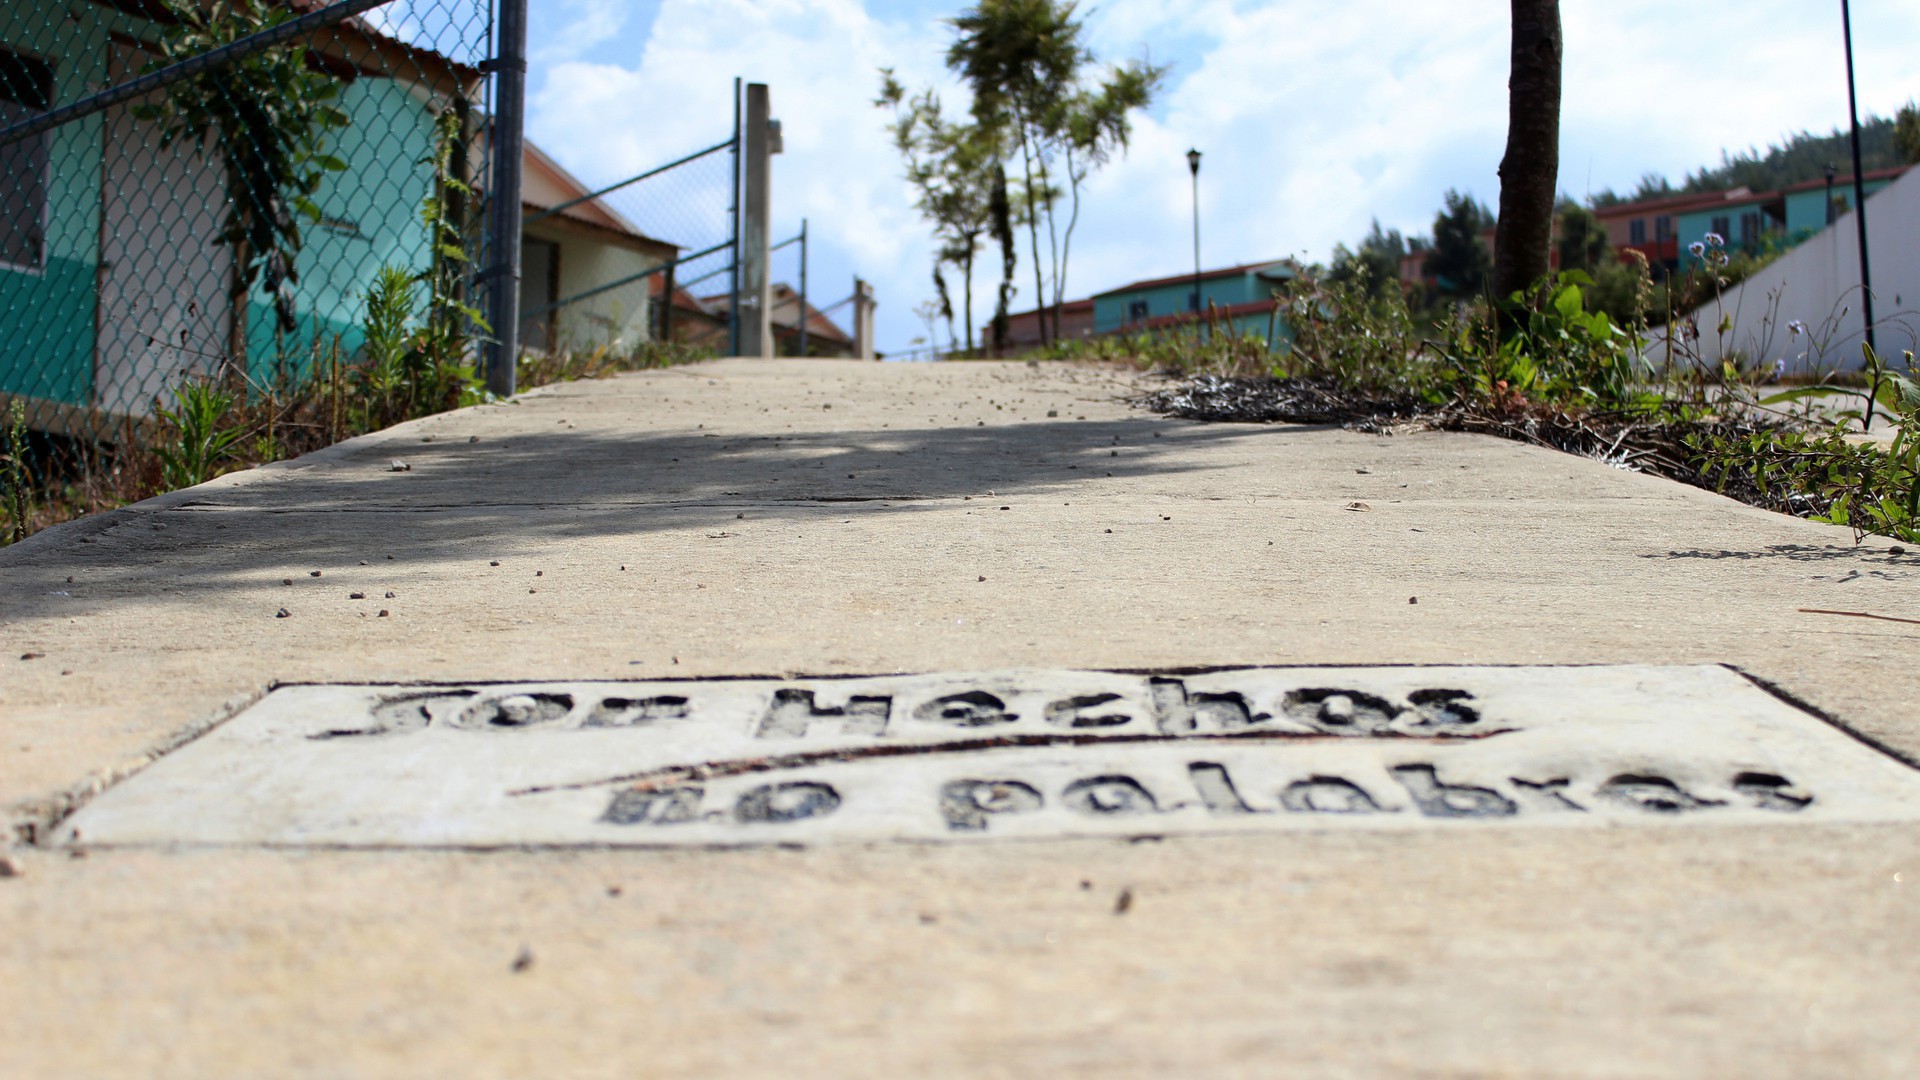 The imprint 'Deeds, not words' sits on the sidewalk in front of an abandonded house in the Sustainable Rural City of Santiago el Pinar. (Photo by Andrea Martinez.)